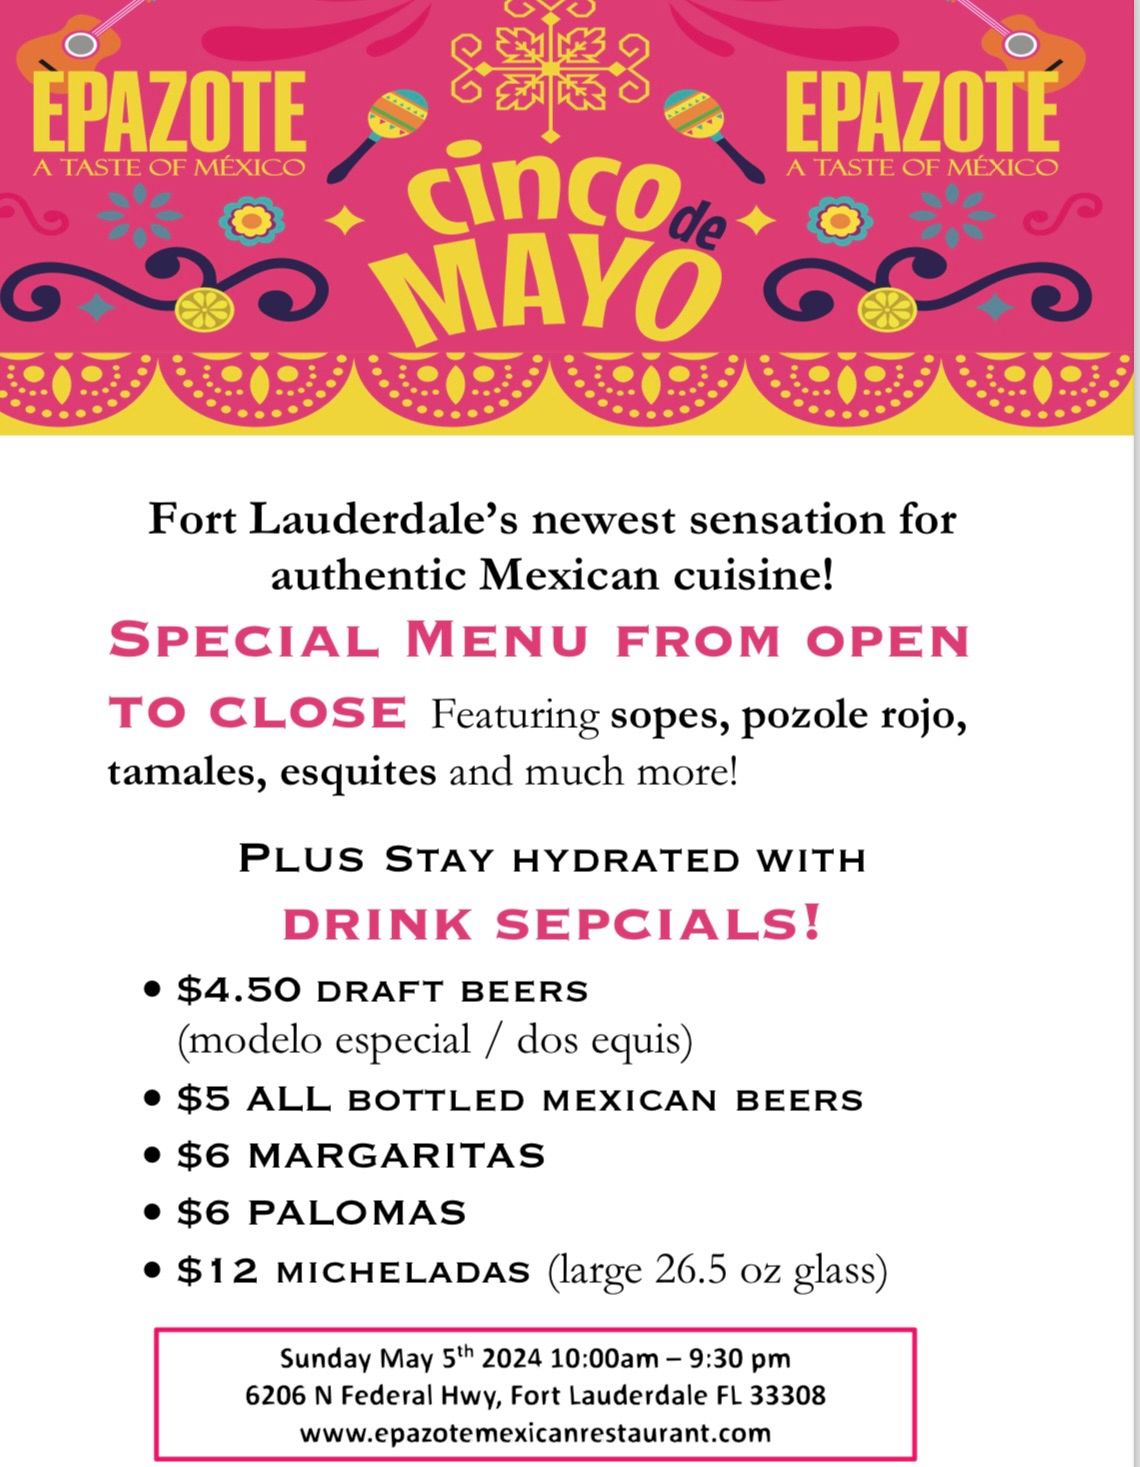 Get ready to spice up your Cinco de Mayo celebration at Epazote! 